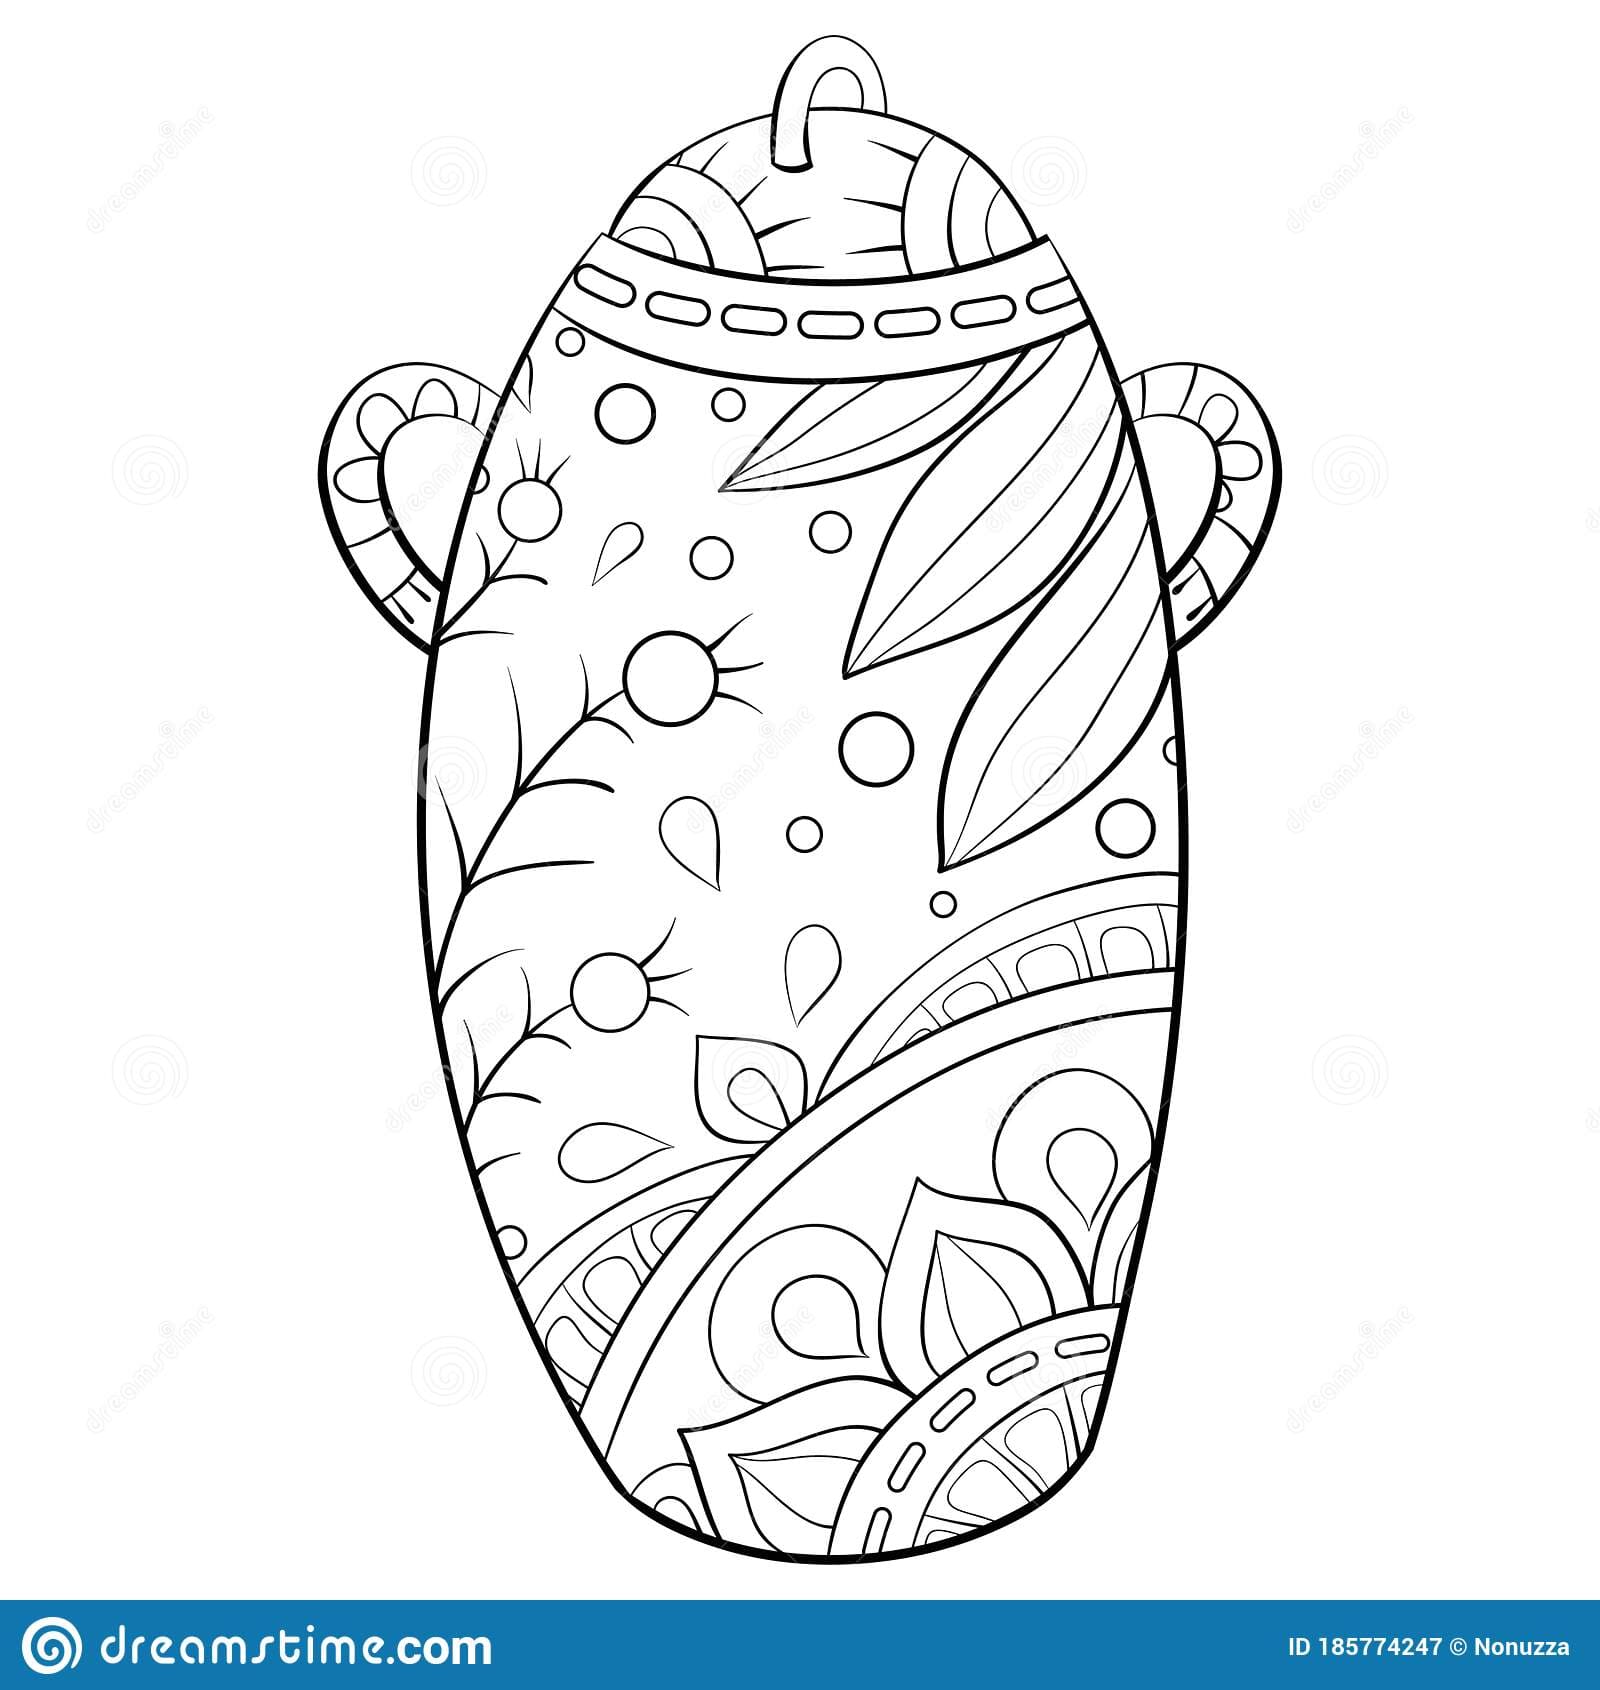 Vases Of Flowers Image Coloring Page